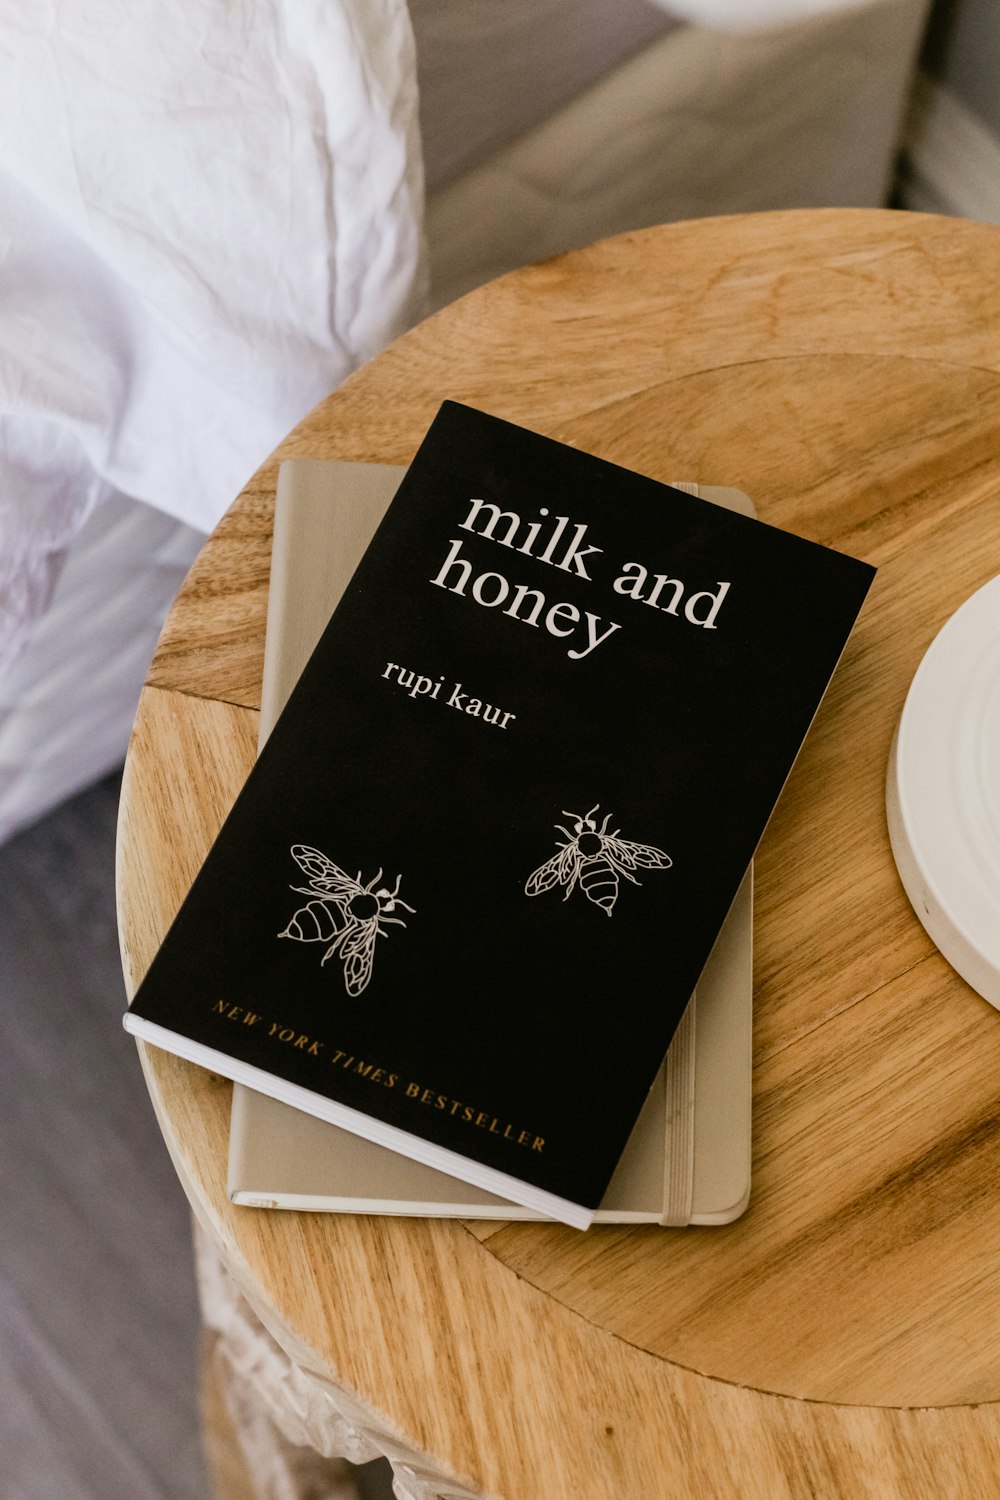 Milk and Honey by Rupi Kaur book on side table